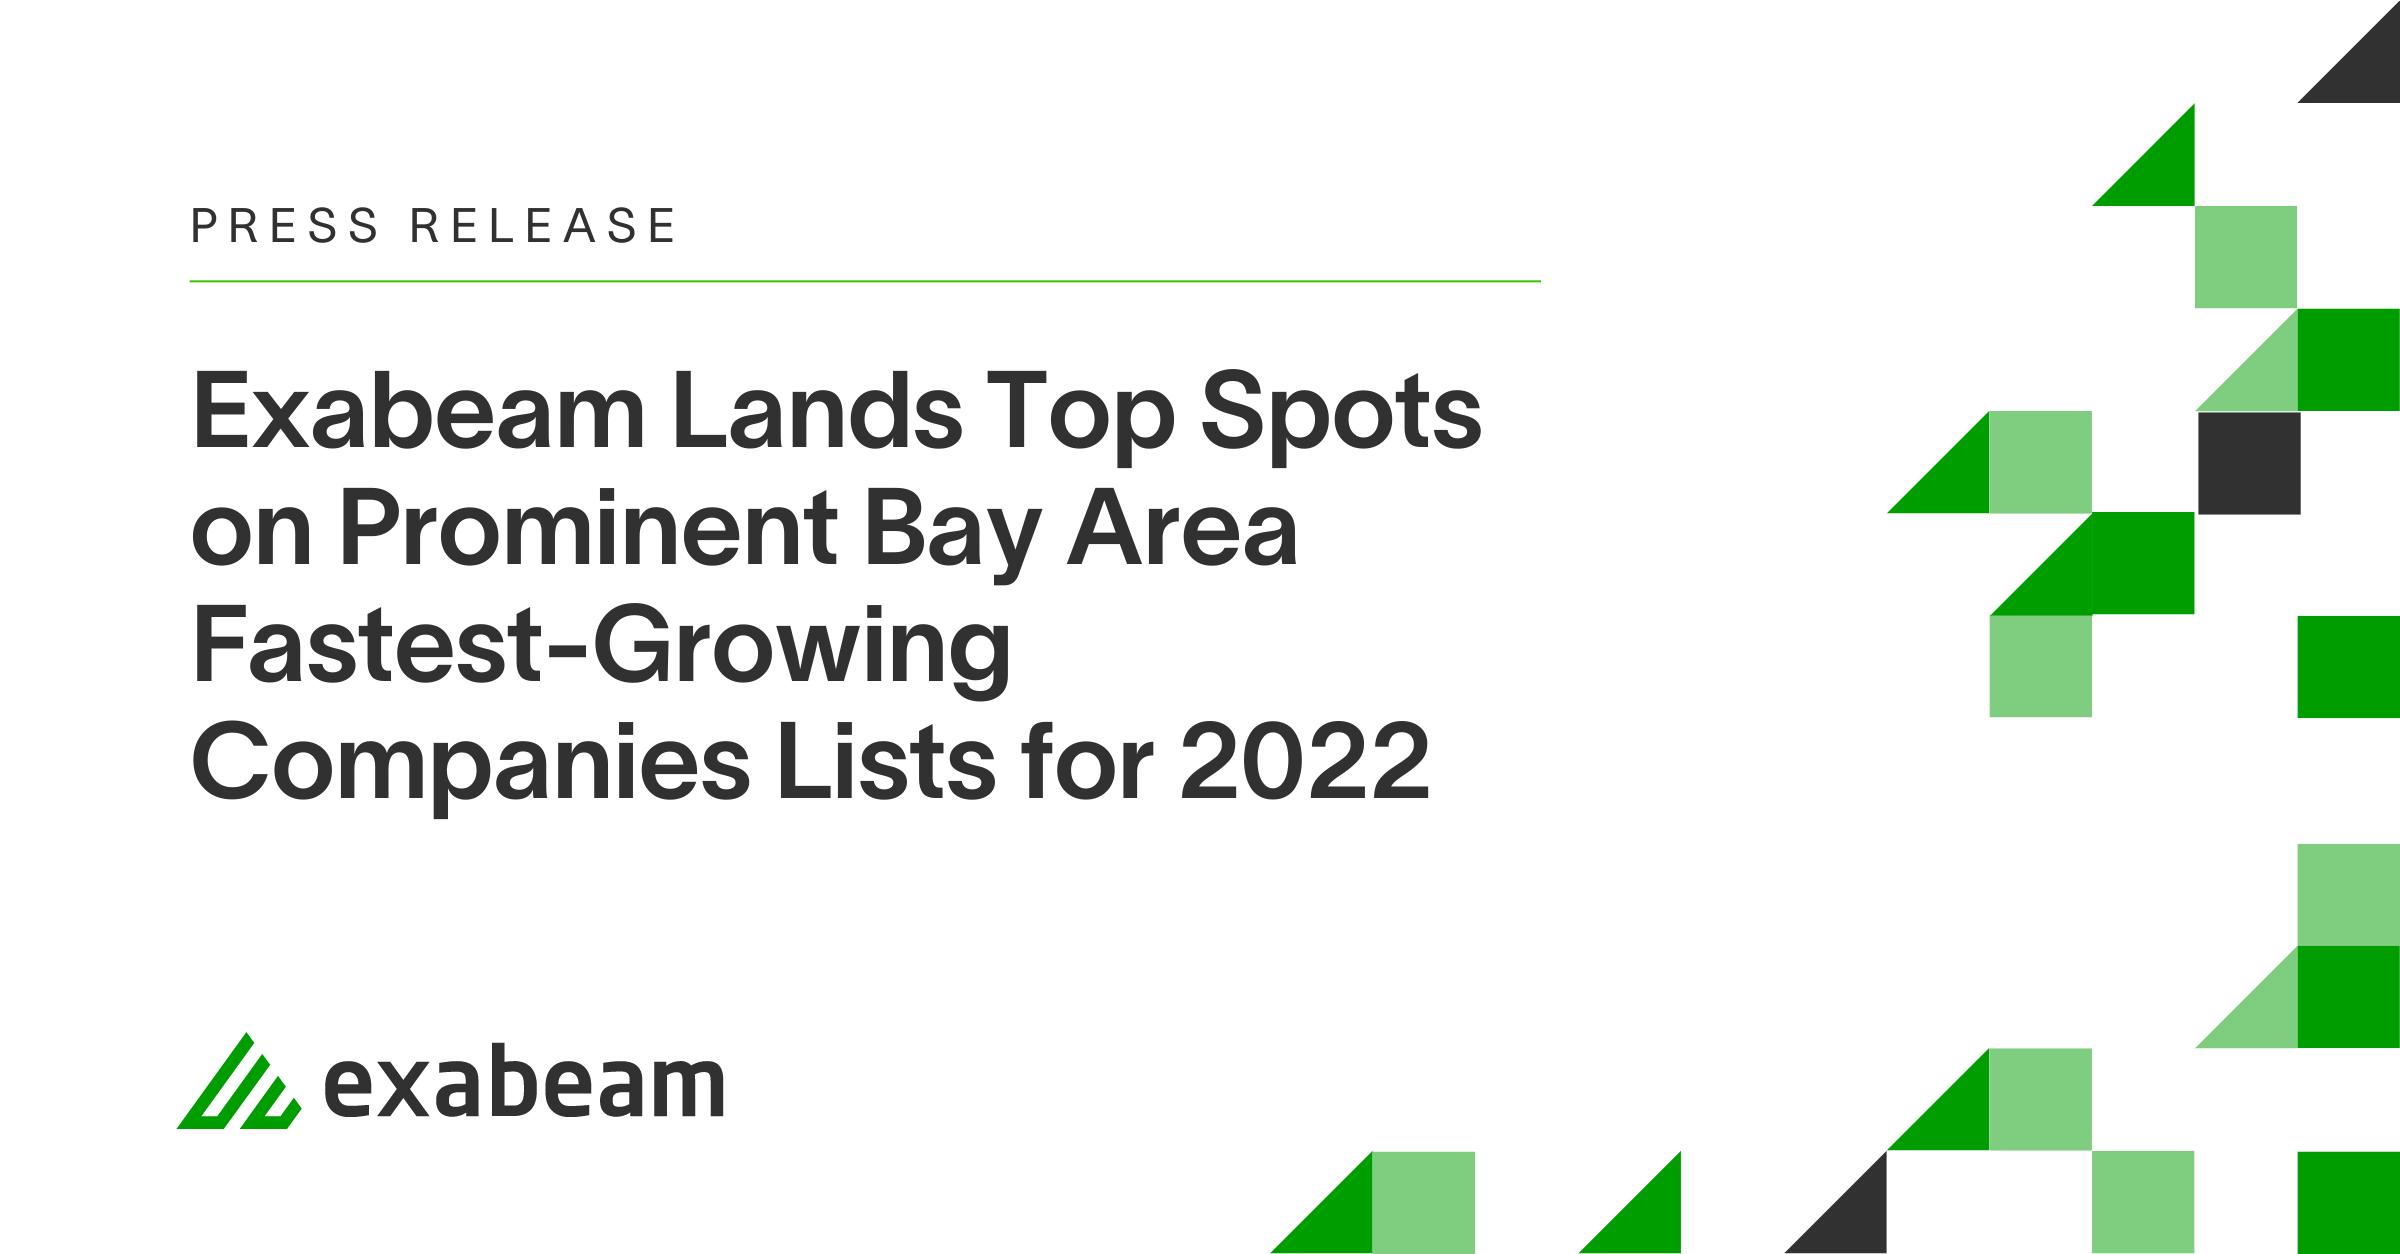 Exabeam Lands Top Spots on Prominent Bay Area Fastest-Growing Companies Lists for 2022